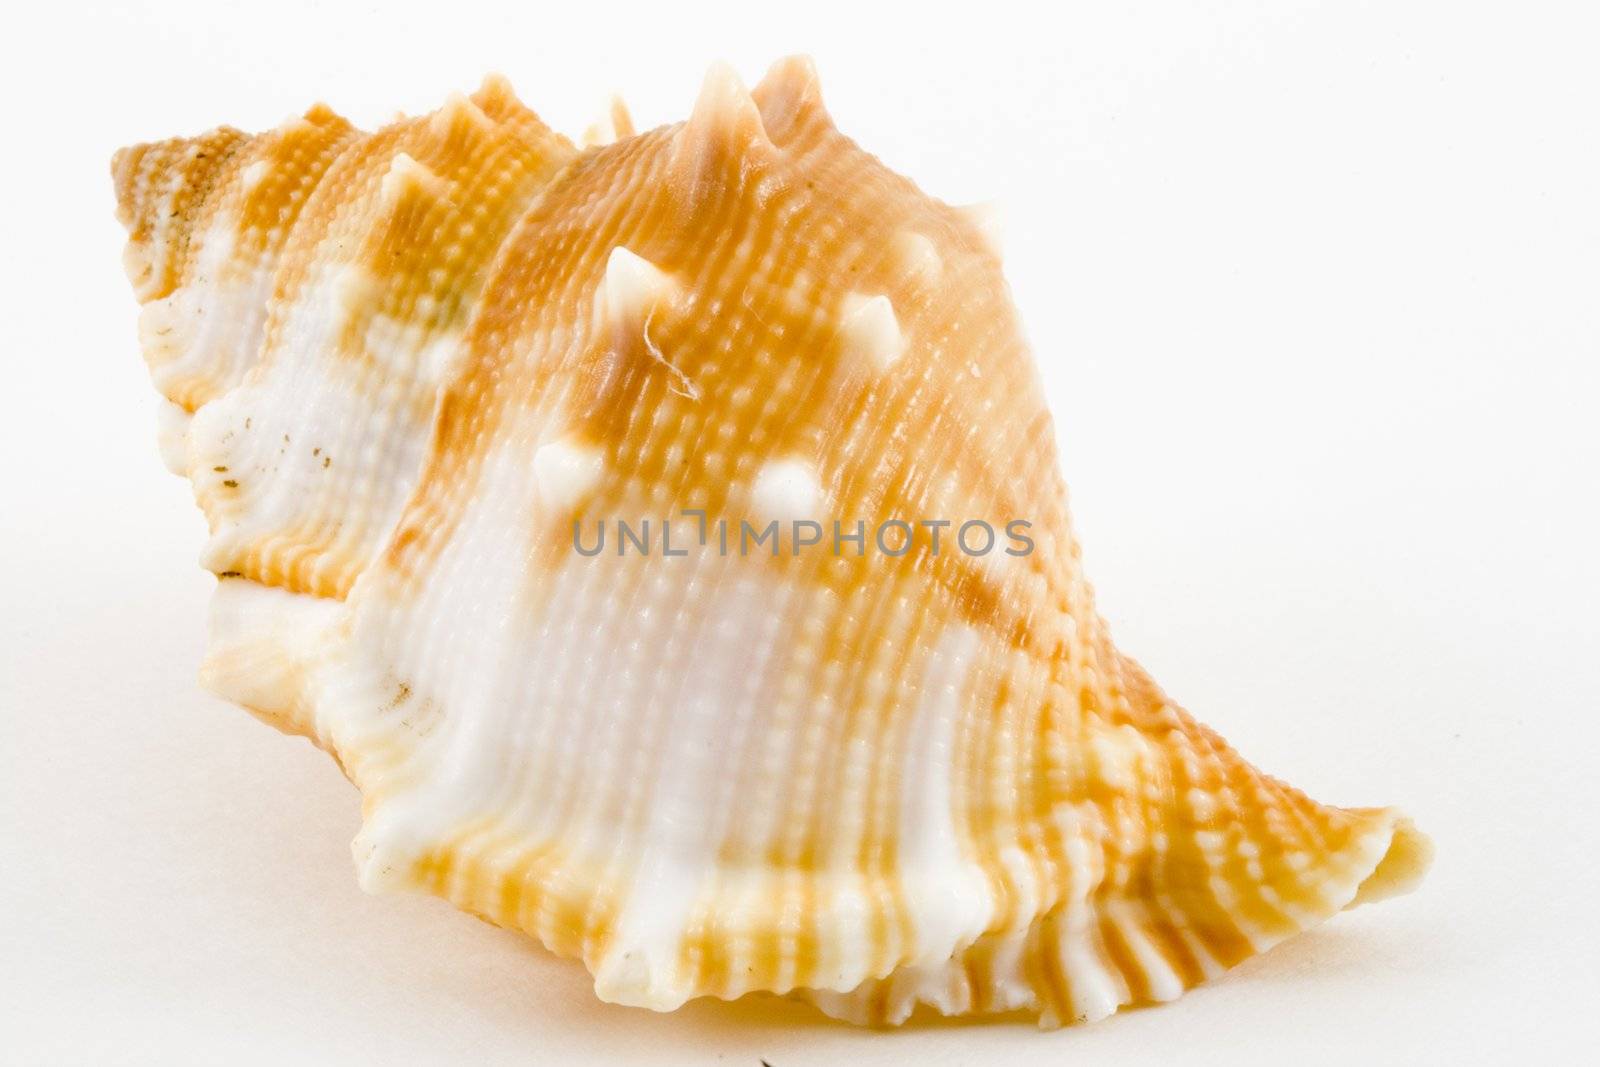 detail of a conch on the white background